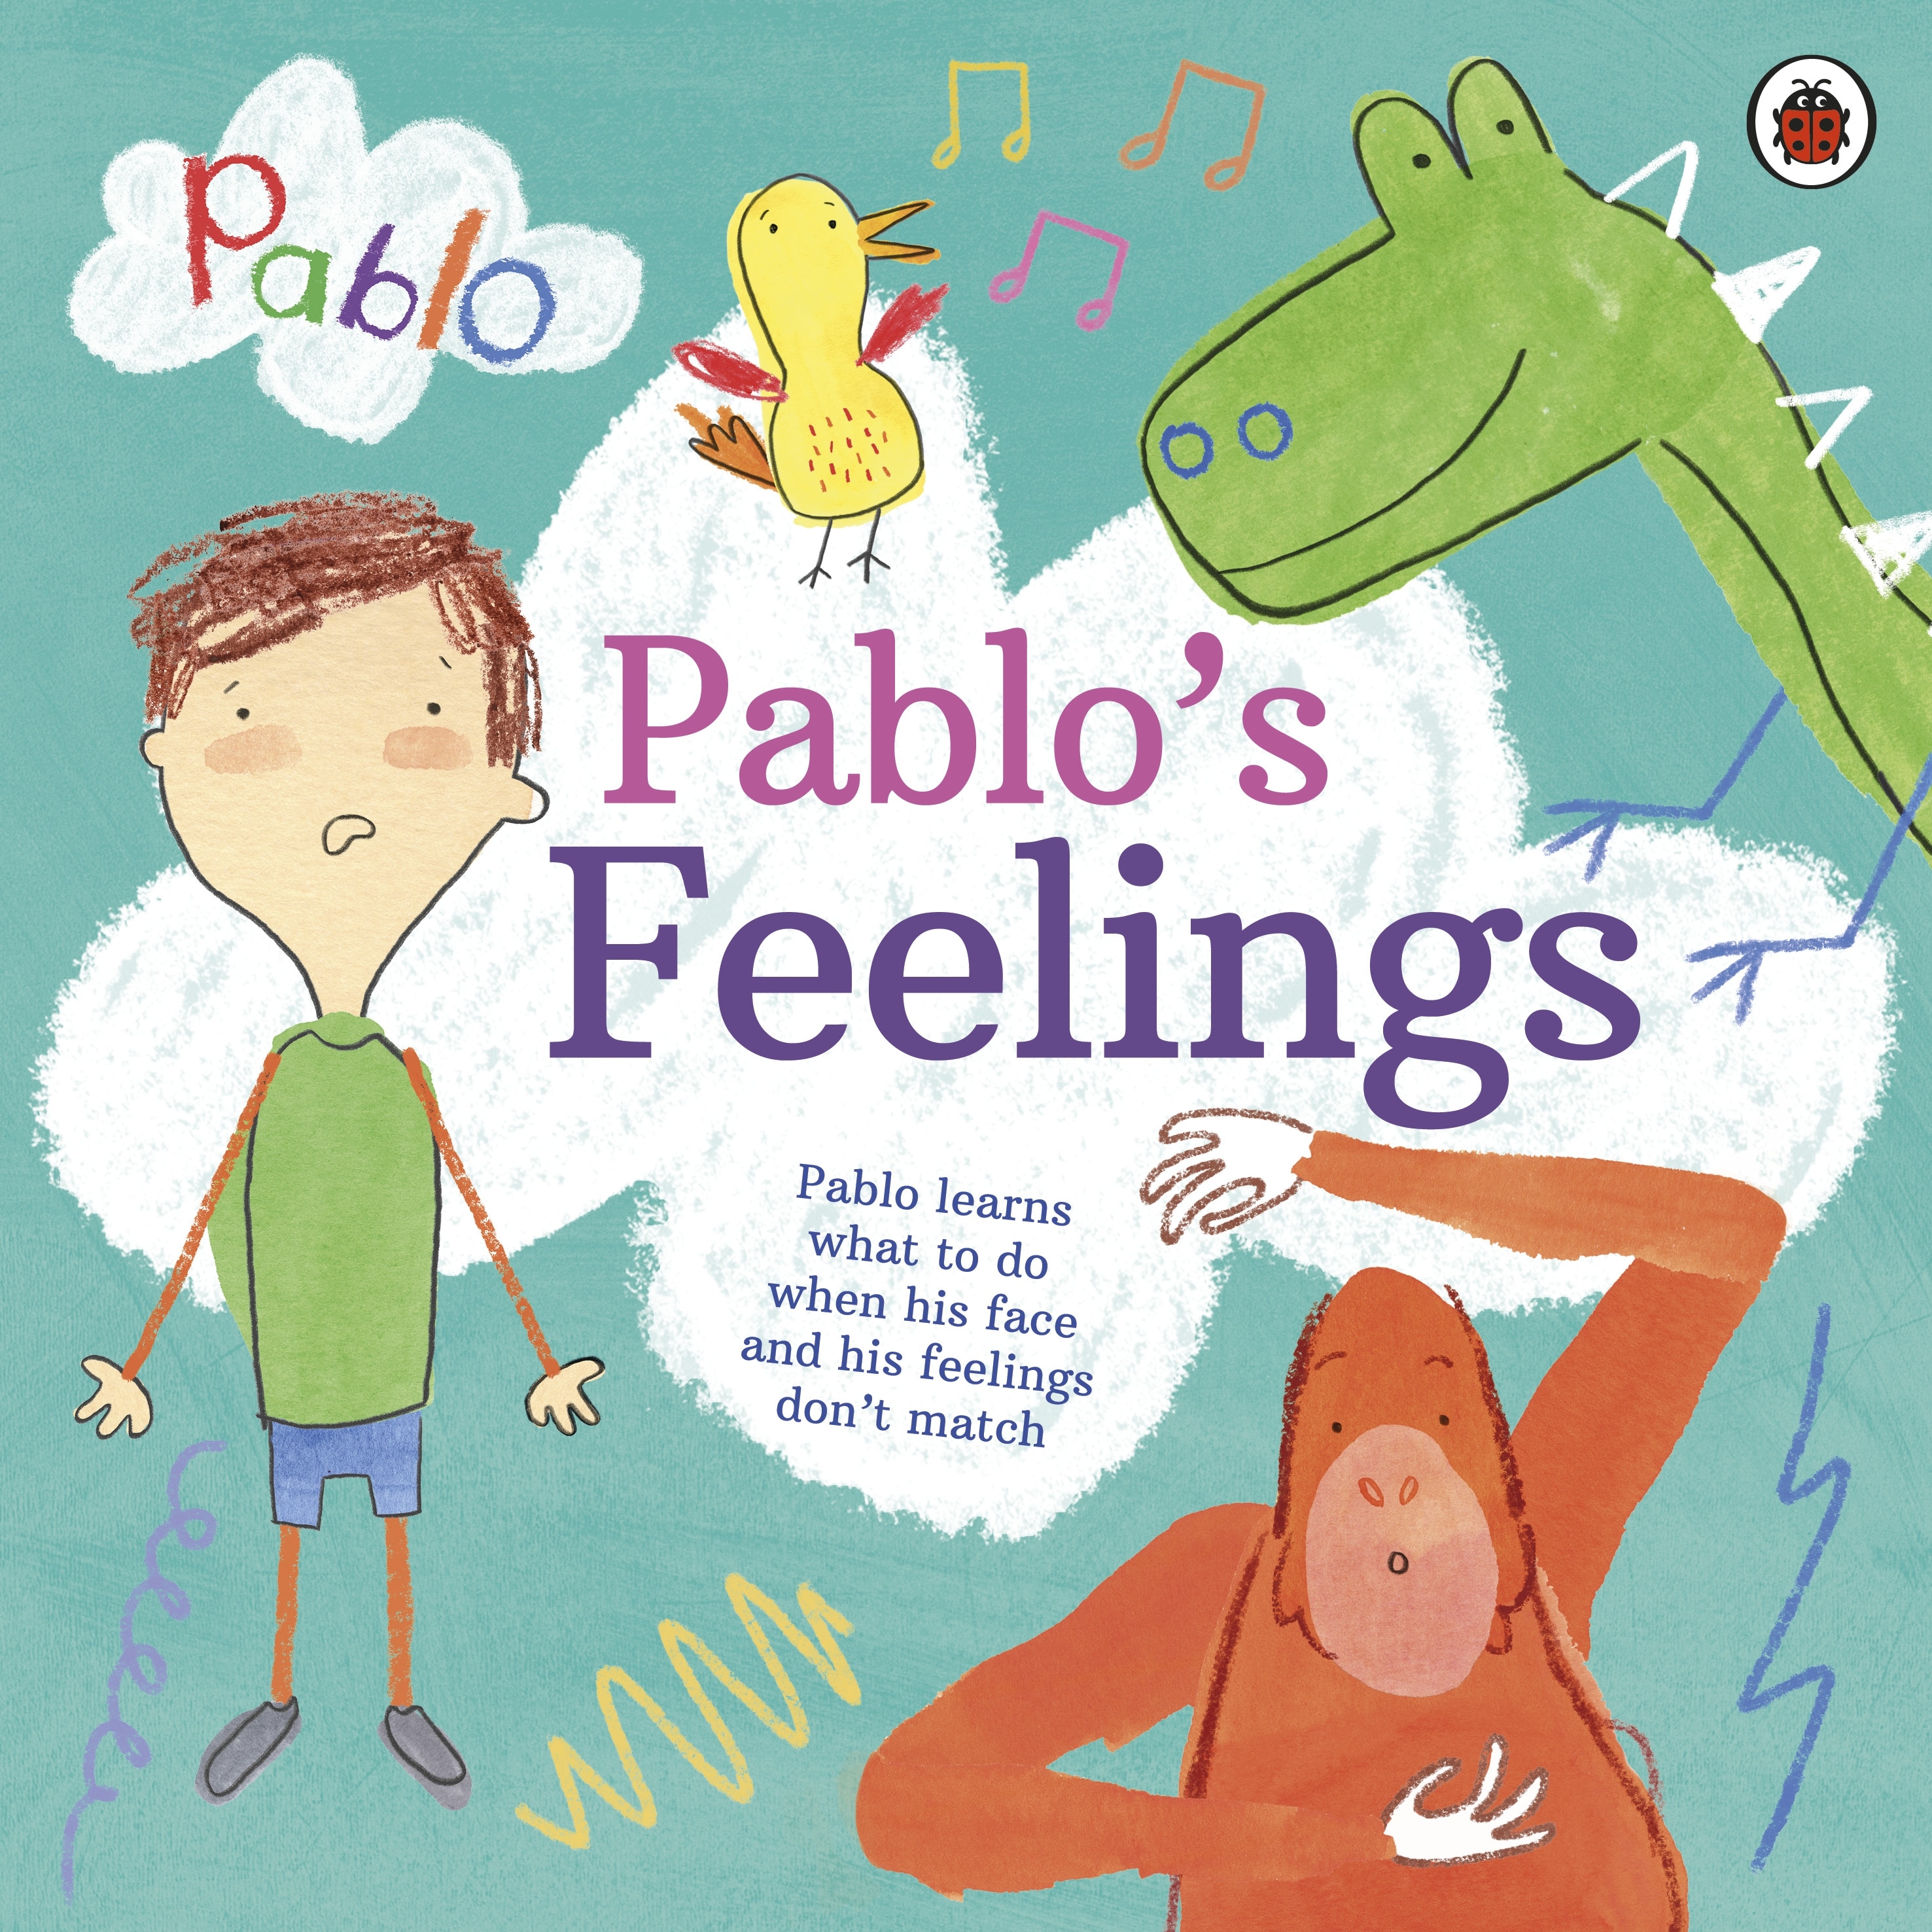 Book “Pablo: Pablo's Feelings” by Pablo — August 6, 2020